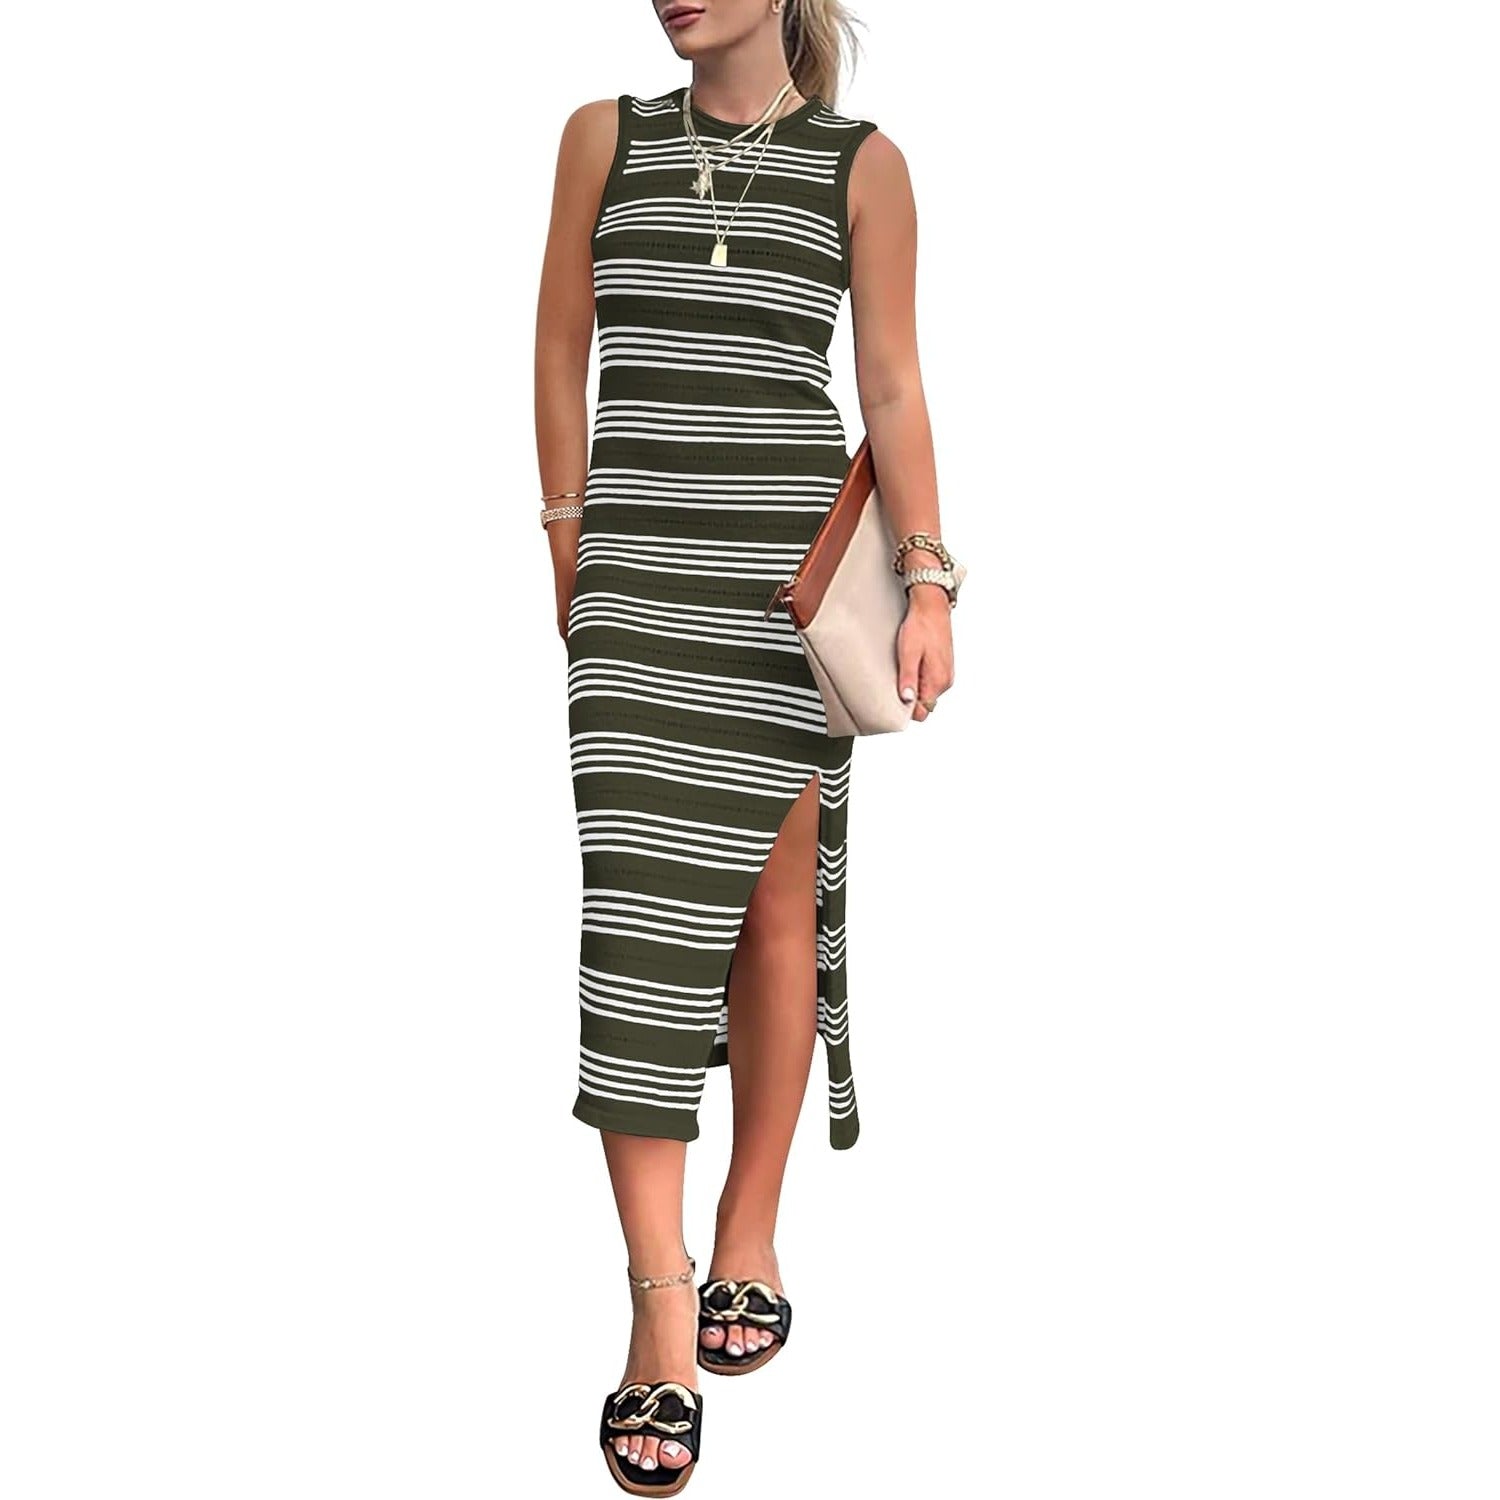 Women's Summer Bodycon Sundresses Casual Midi Sleeveless Hollow Out Knit Side Slit Striped Long Tank Dress